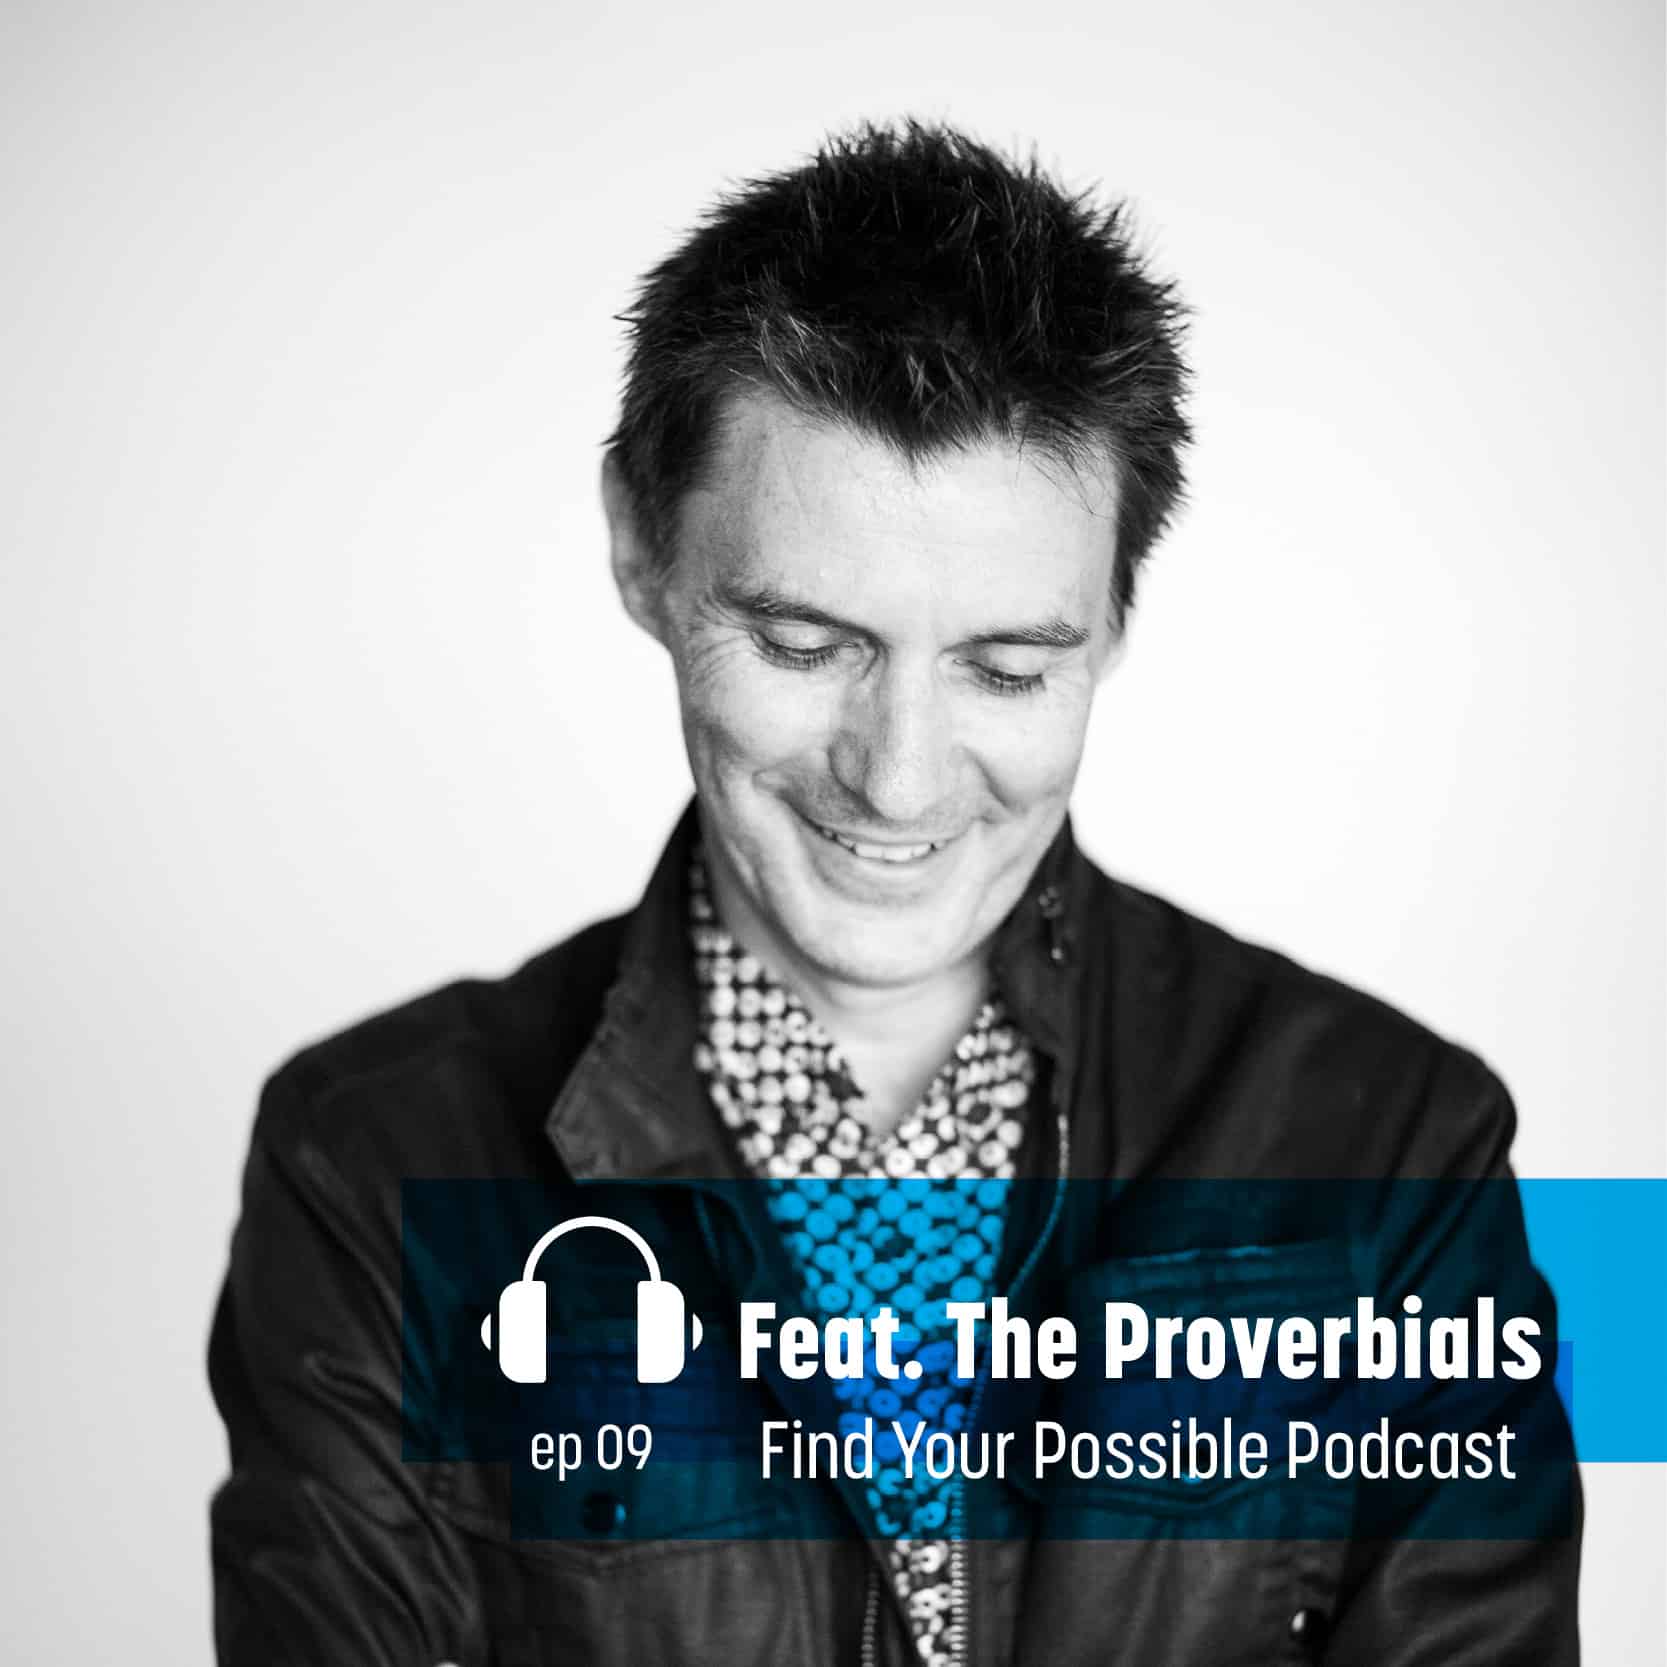 Brian Daily, The Proverbials, conscious business, conscious consumerism, Mezzanine Find Your Possible Podcast Ep09